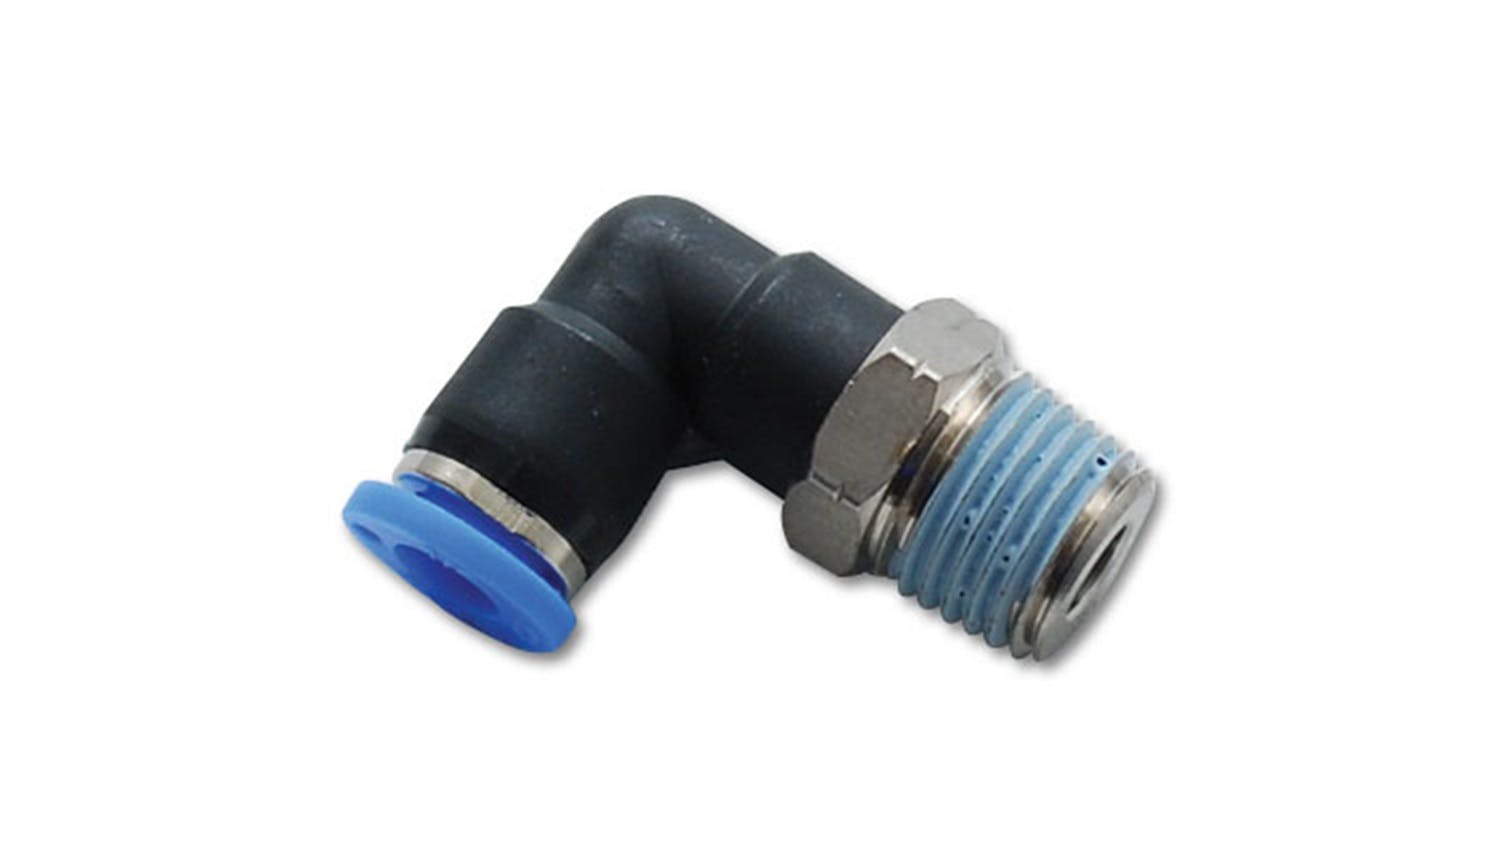 Vibrant Performance 2655 Male Elbow Pneumatic Vacuum Fitting (3/8 inch NPT Thread) for use with 1/4 inch OD